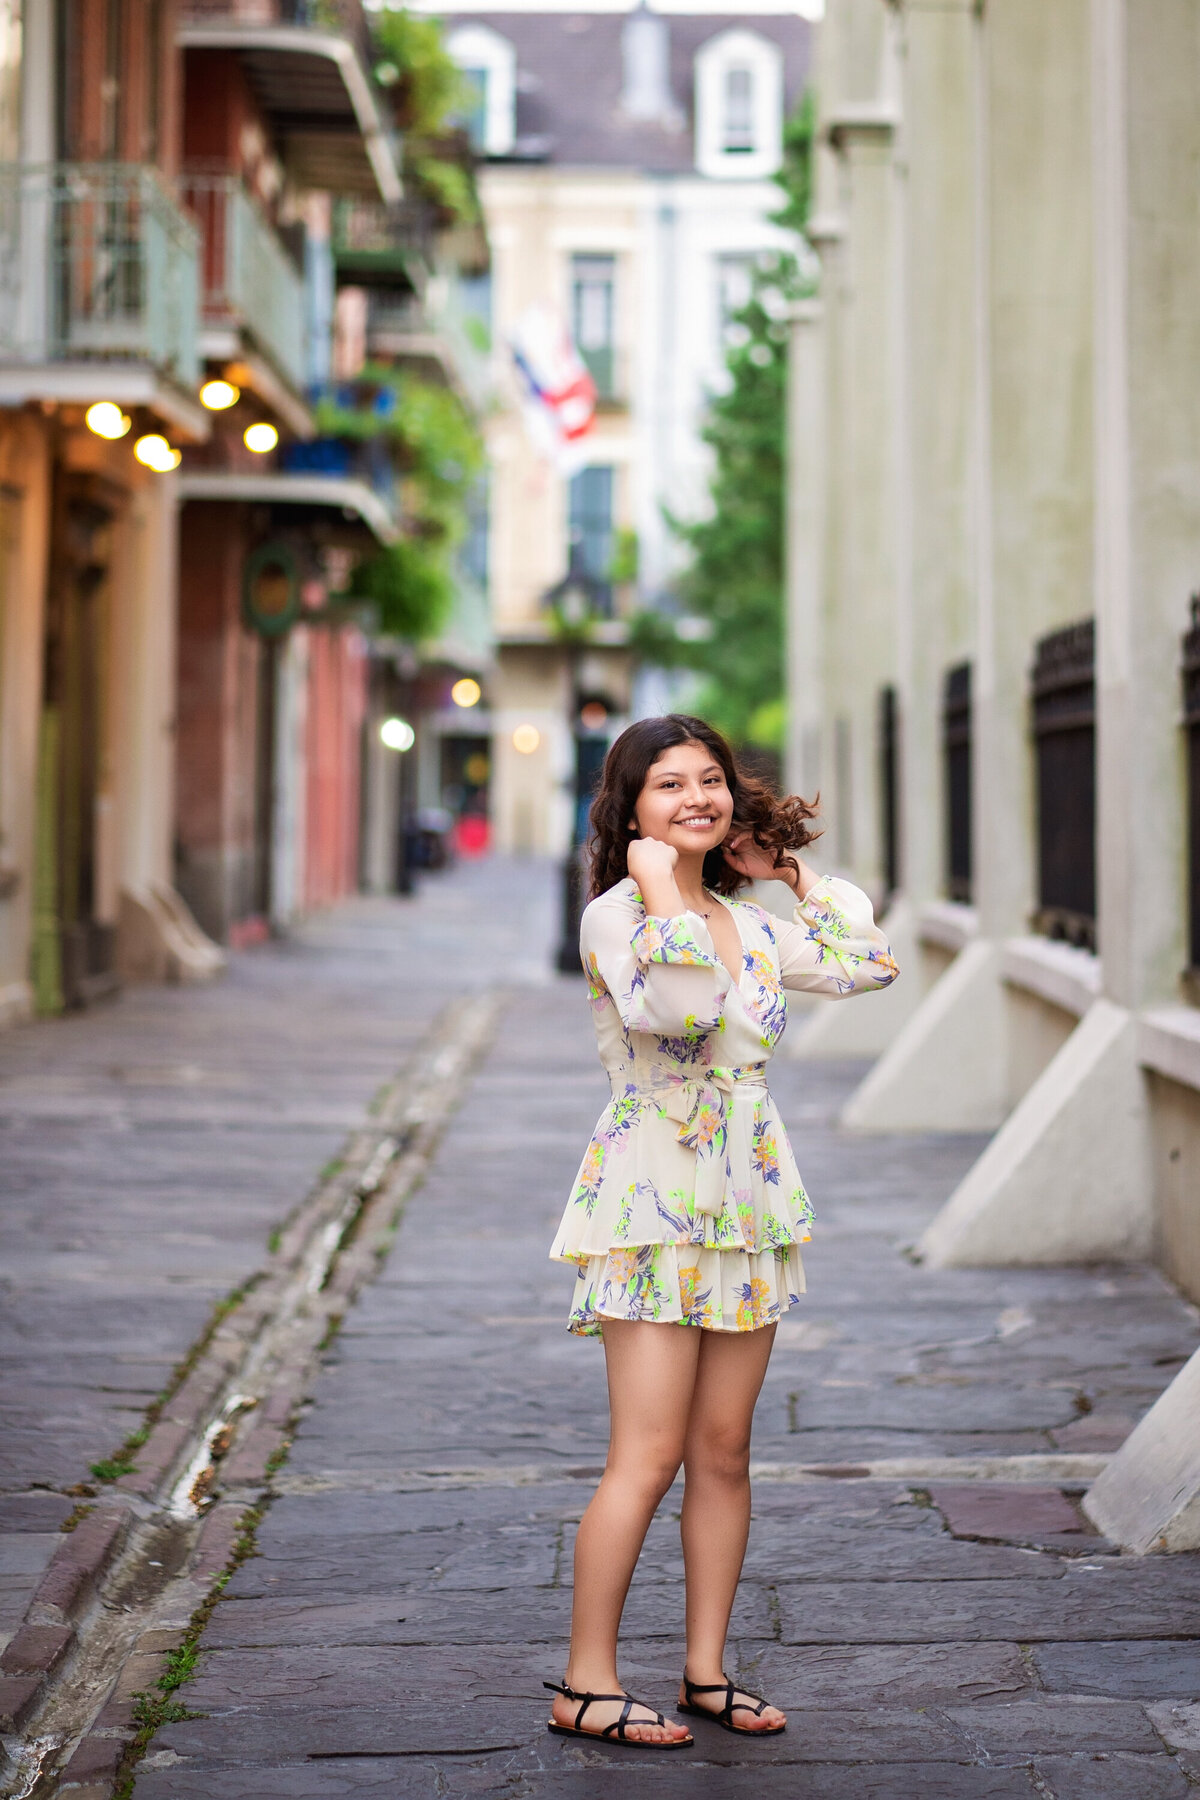 High School senior hispanic female in Pirate's Alley in New Orleans.  She is wearing a short jumper, sandals, and is swinging her hair and laughing.  The street is cobblestone and St. Louis Cathedral is on her right.